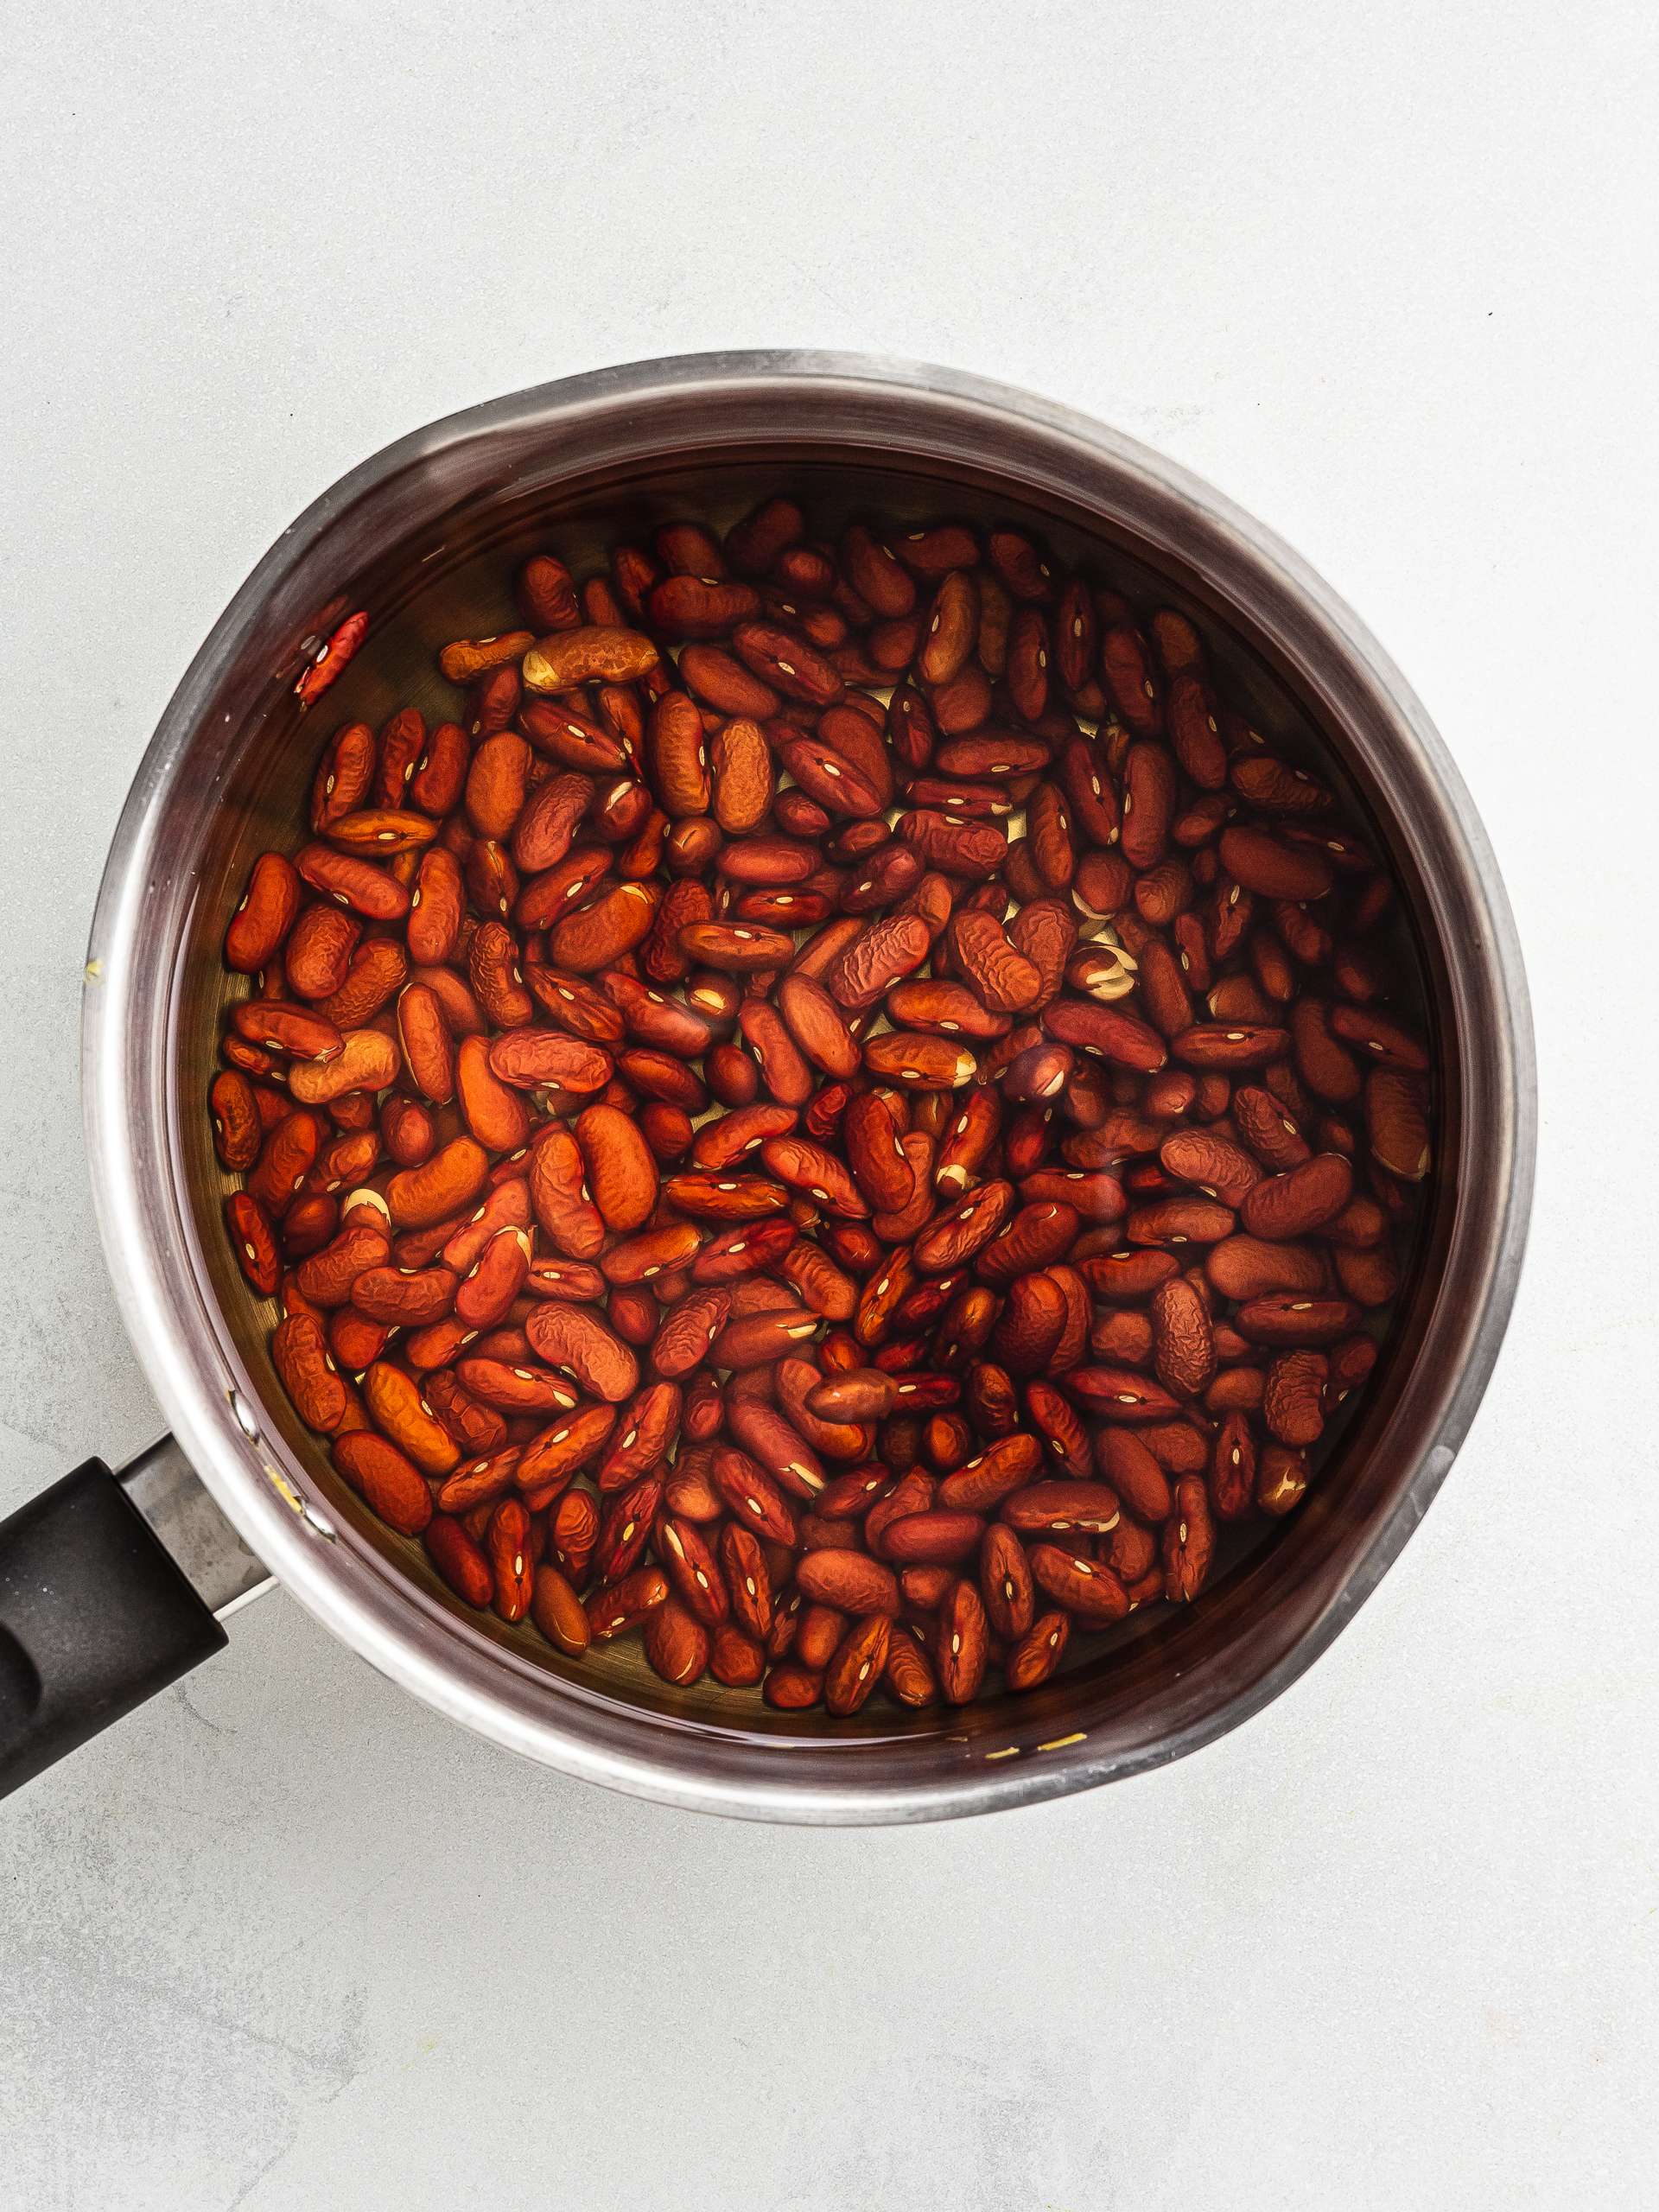 red kidney beans soaking in water